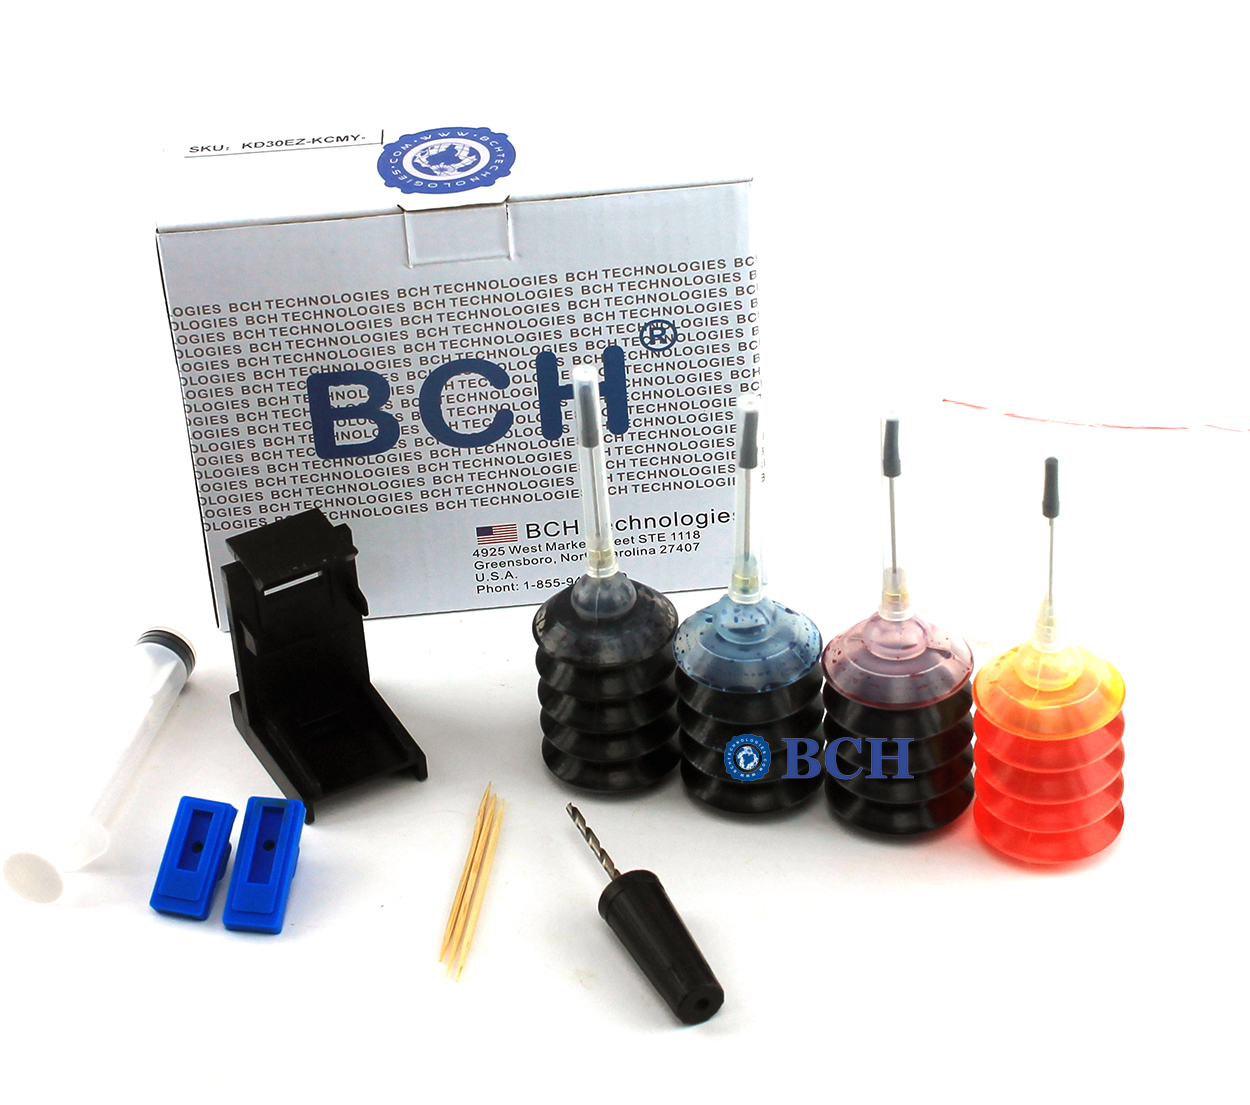 BCH First-Timer Printer Ink Refill Kit for 21, 56, 60, 61, 62, 65, 74, 75, 93, 95, 96, 97, 901 - 1 pack of EZ30-T - image 2 of 4